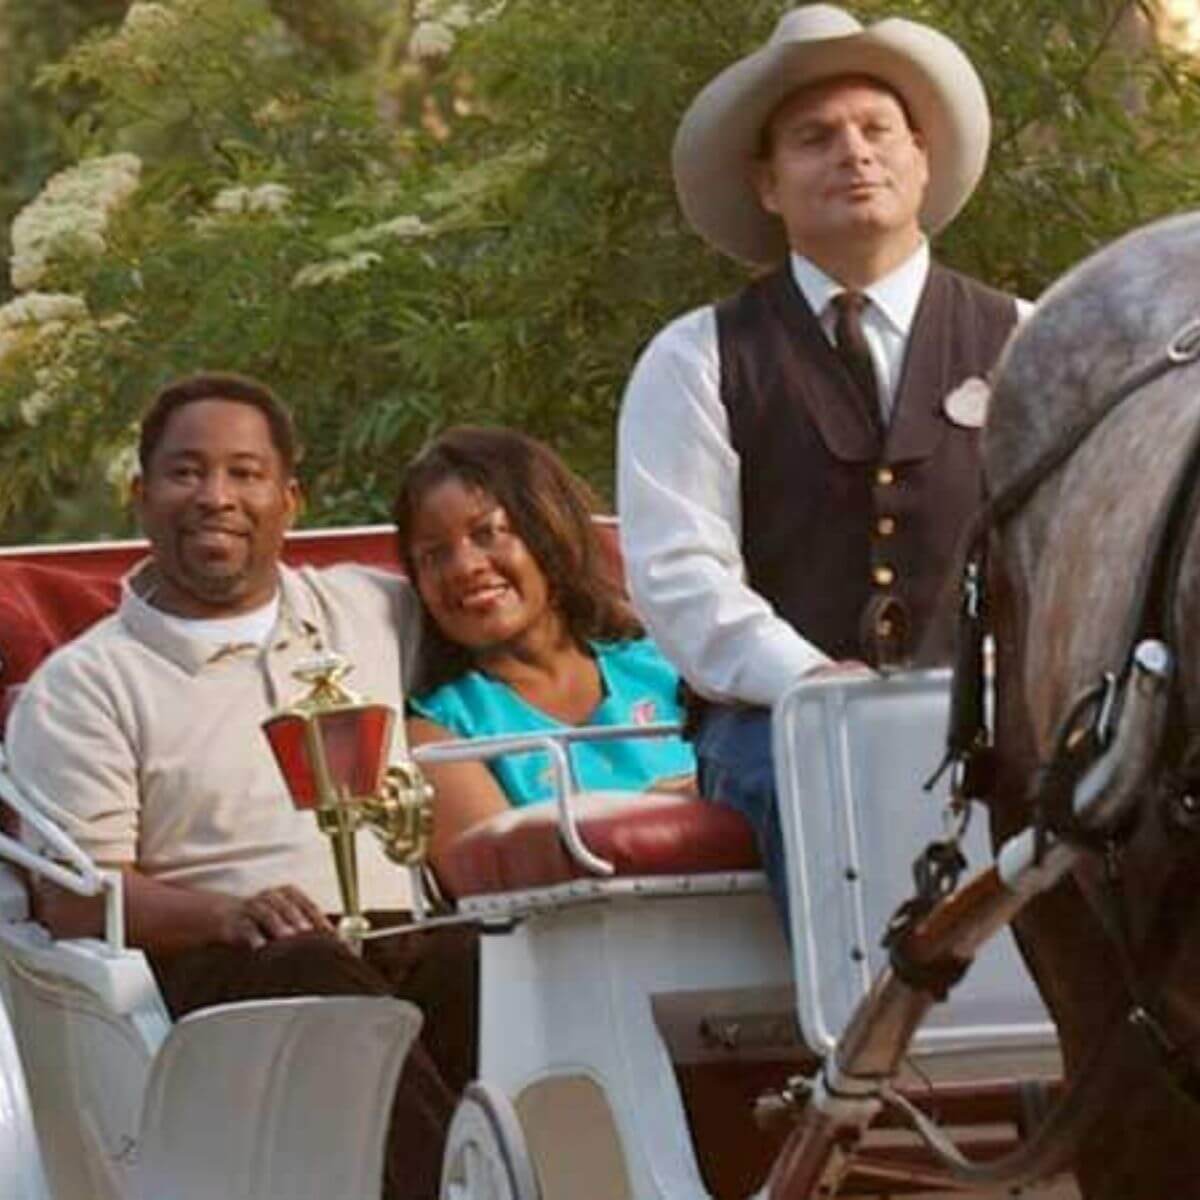 Photo of a man and woman enjoying a horse-drawn carriage ride at Disney World.